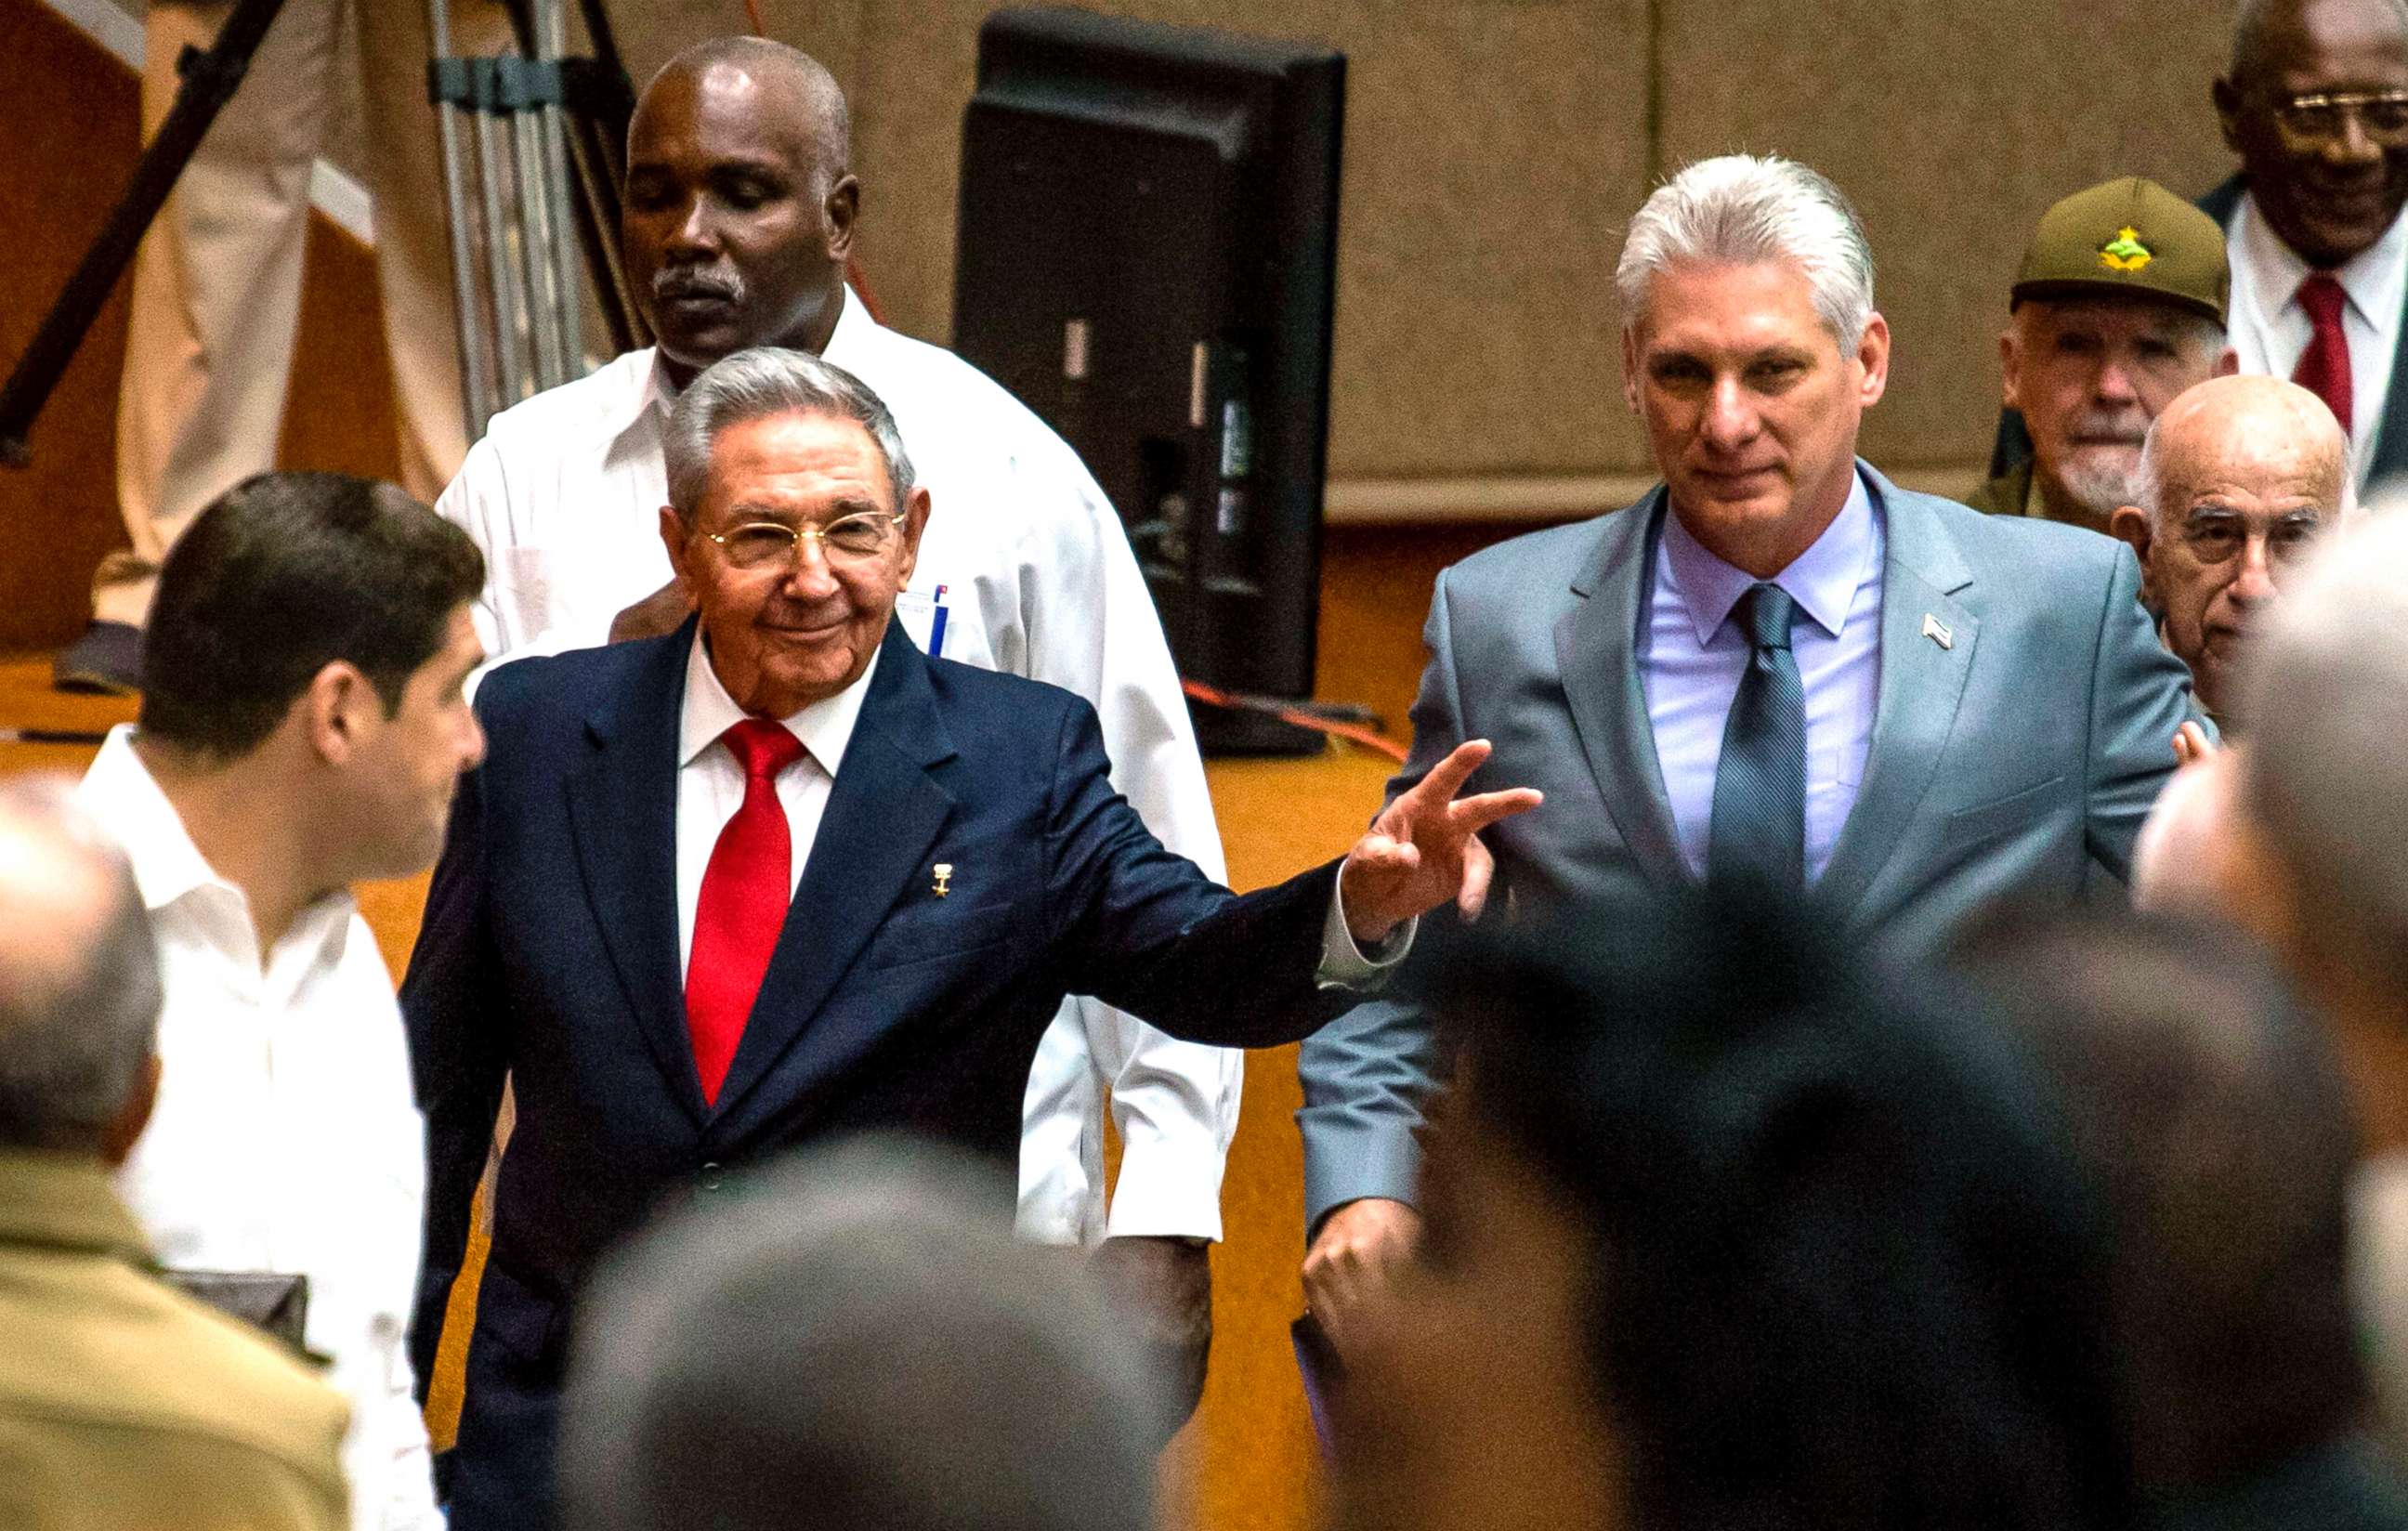 PHOTO: Cuban President Raul Castro (L) and First Vice-President Miguel Diaz-Canel (C) arrive for a National Assembly session that named the latter as the candidate to succeed Castro as president, in Havana, April 18, 2018.